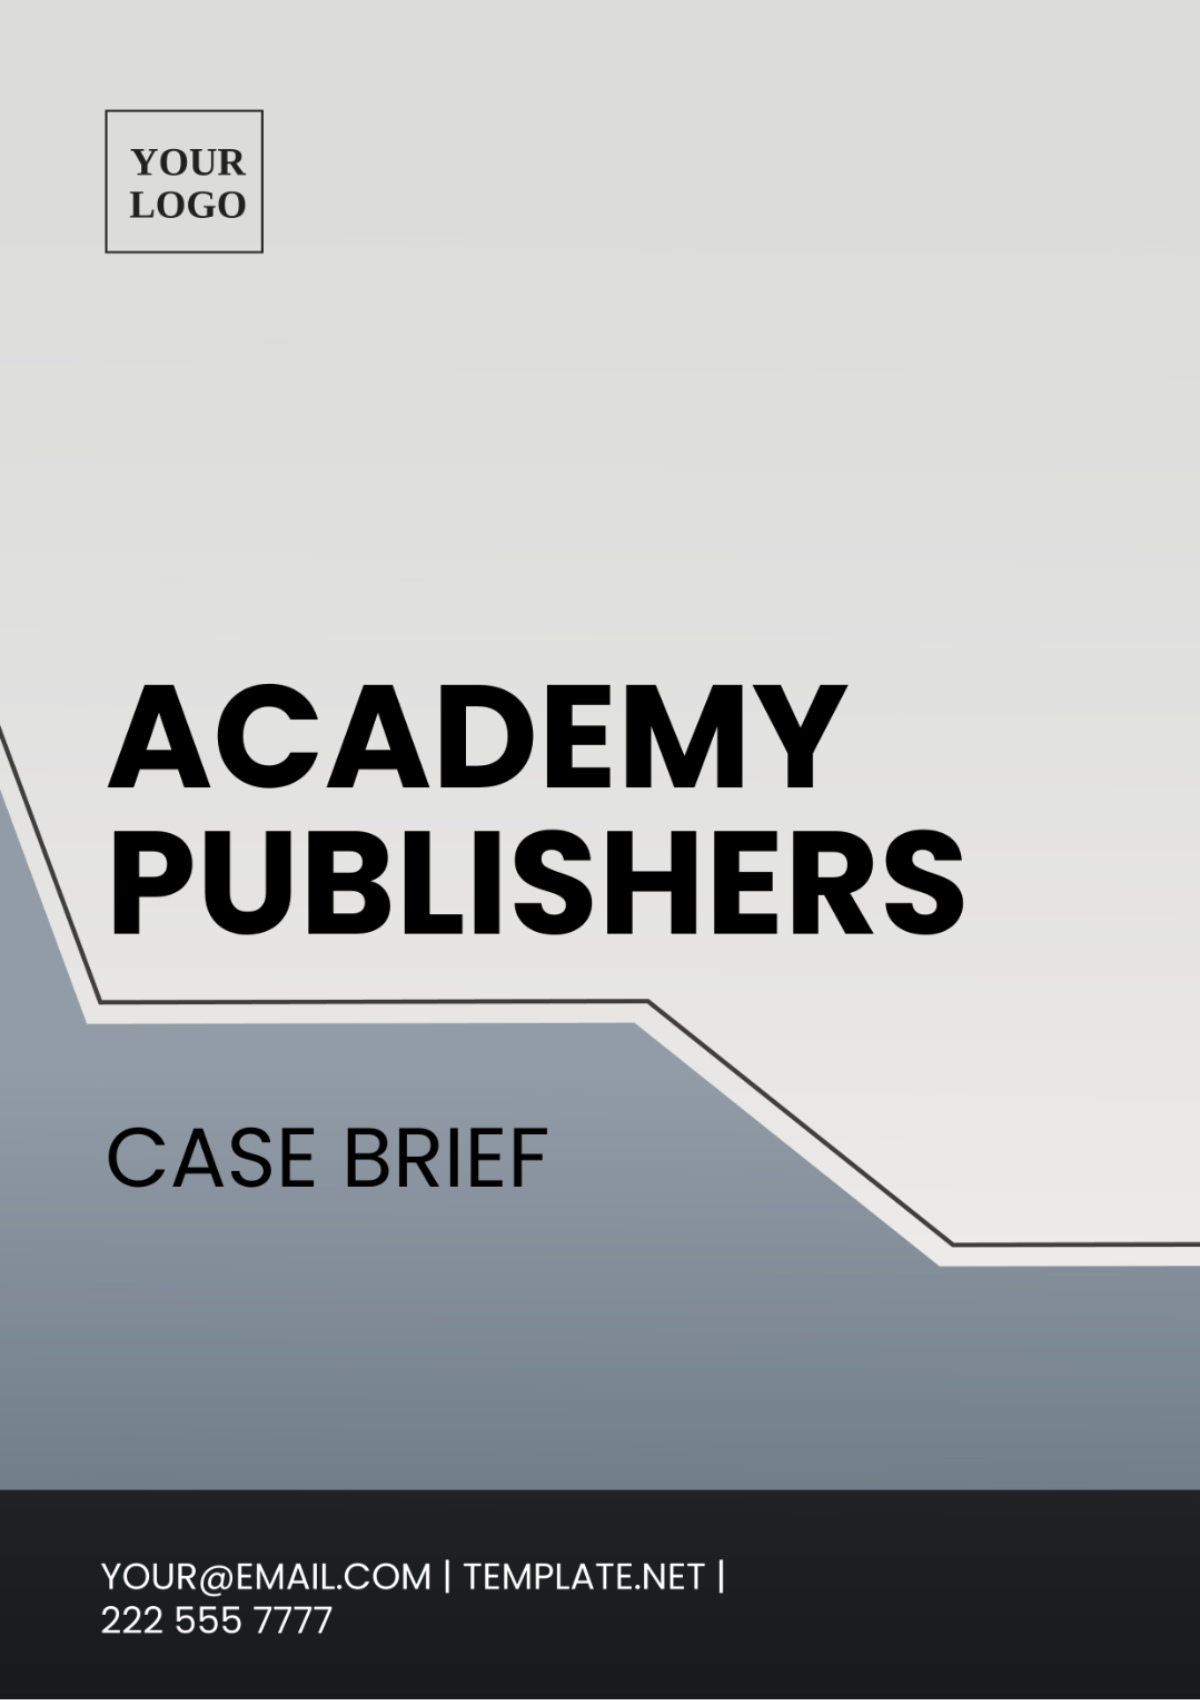 Free Academy Publishers Case Brief Template